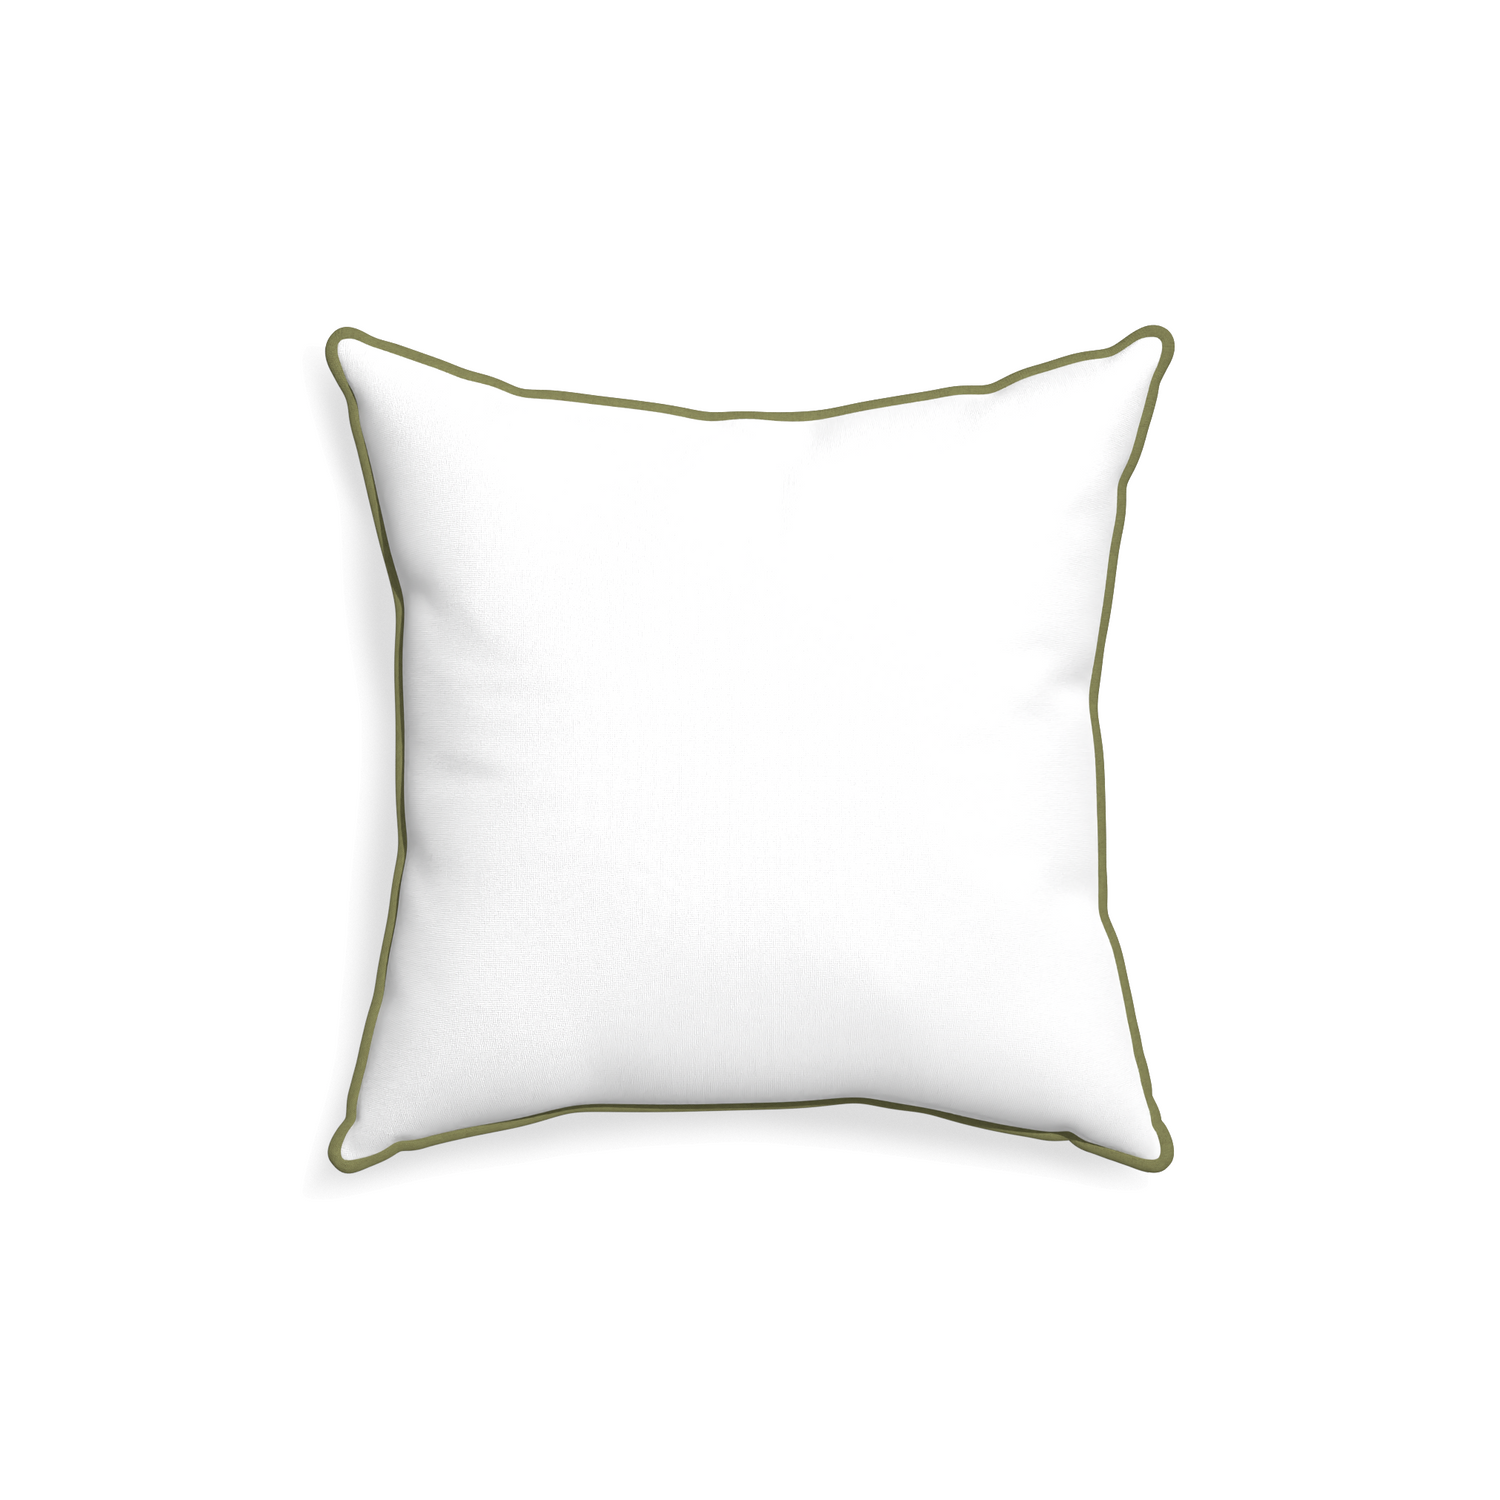 18-square snow custom pillow with moss piping on white background